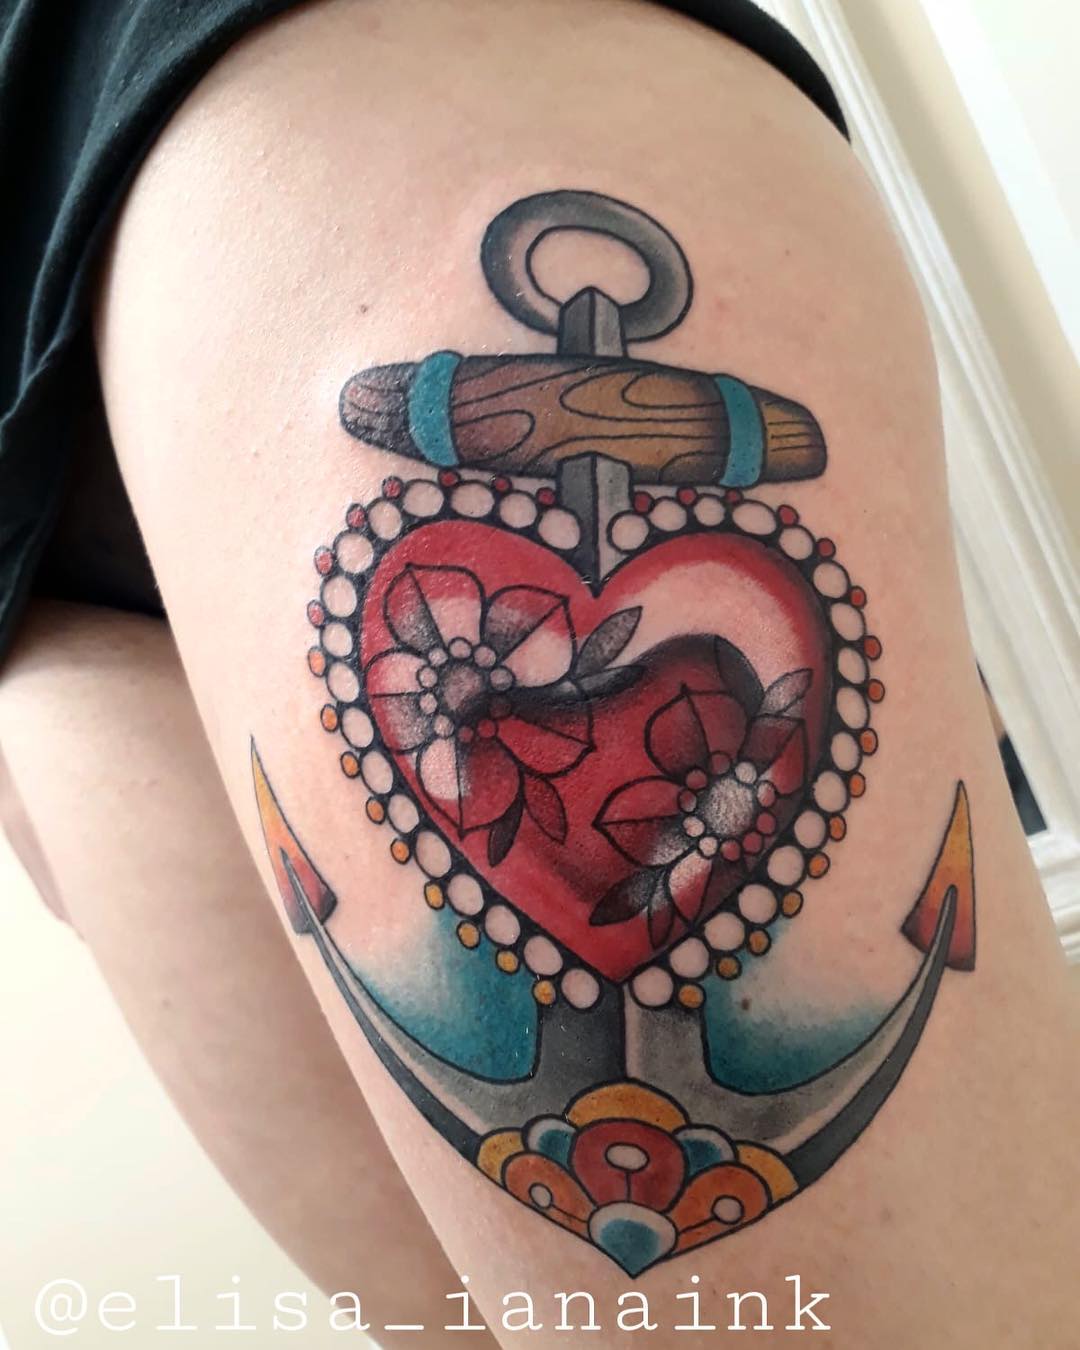 Colorful anchor tattoo with heart on thigh